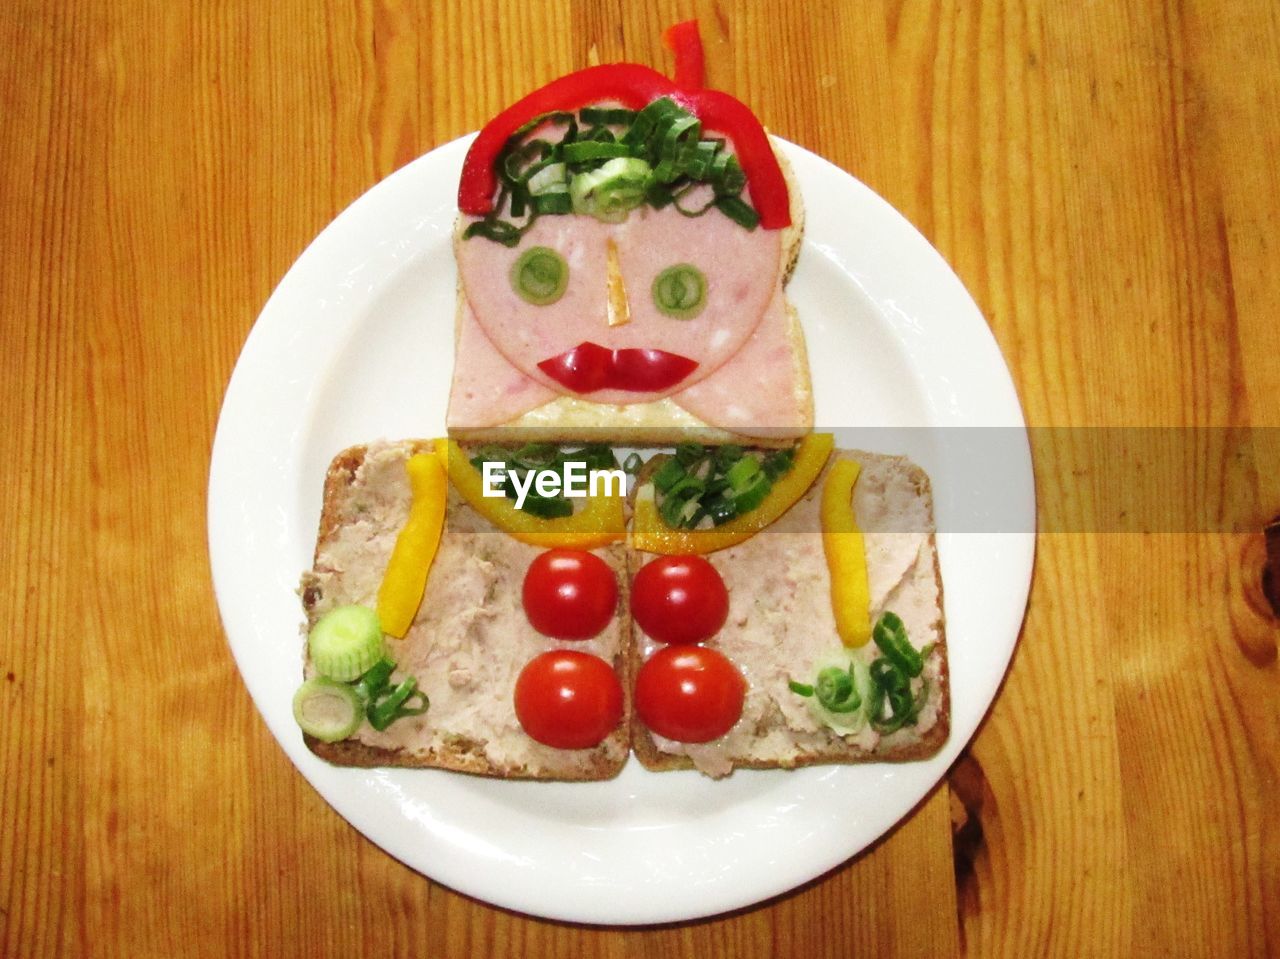 Anthropomorphic face on sandwiches